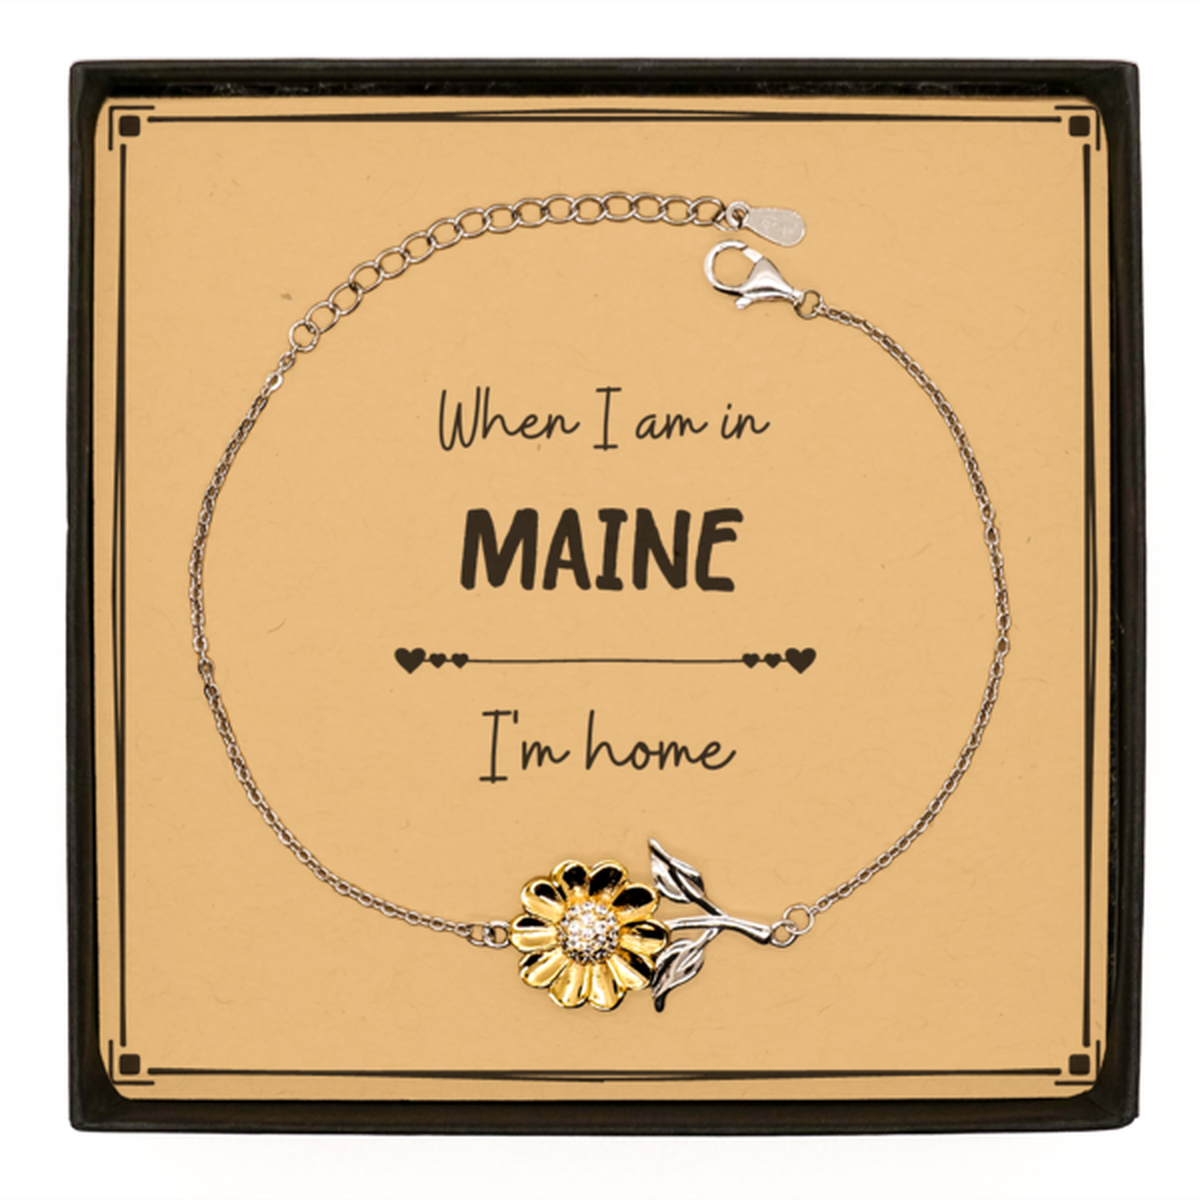 When I am in Maine I'm home Sunflower Bracelet, Message Card Gifts For Maine, State Maine Birthday Gifts for Friends Coworker